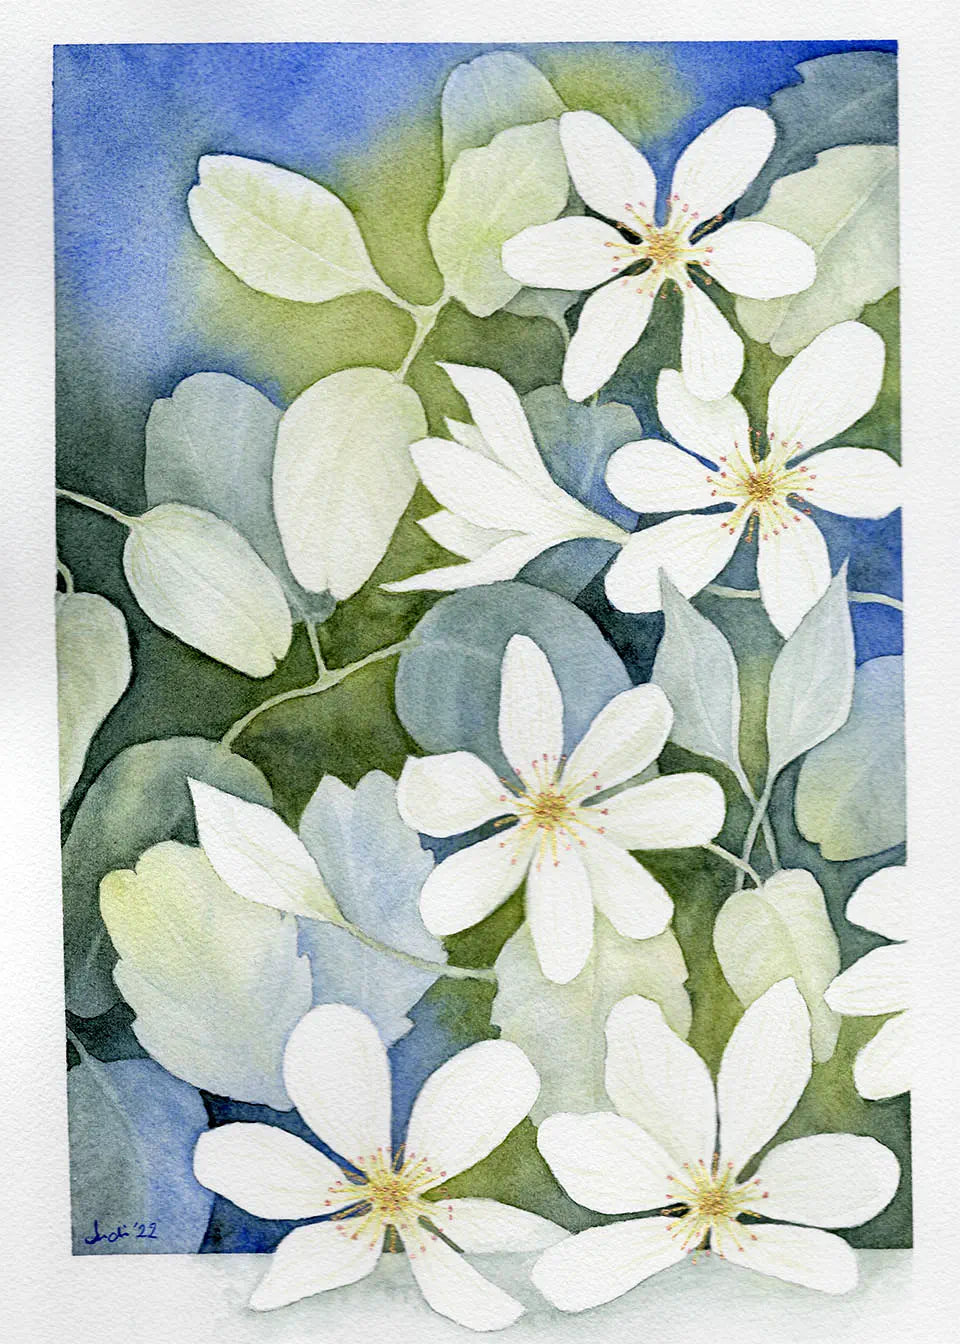 Watercolour painting of clematis flowers in blue and green with touches of gold